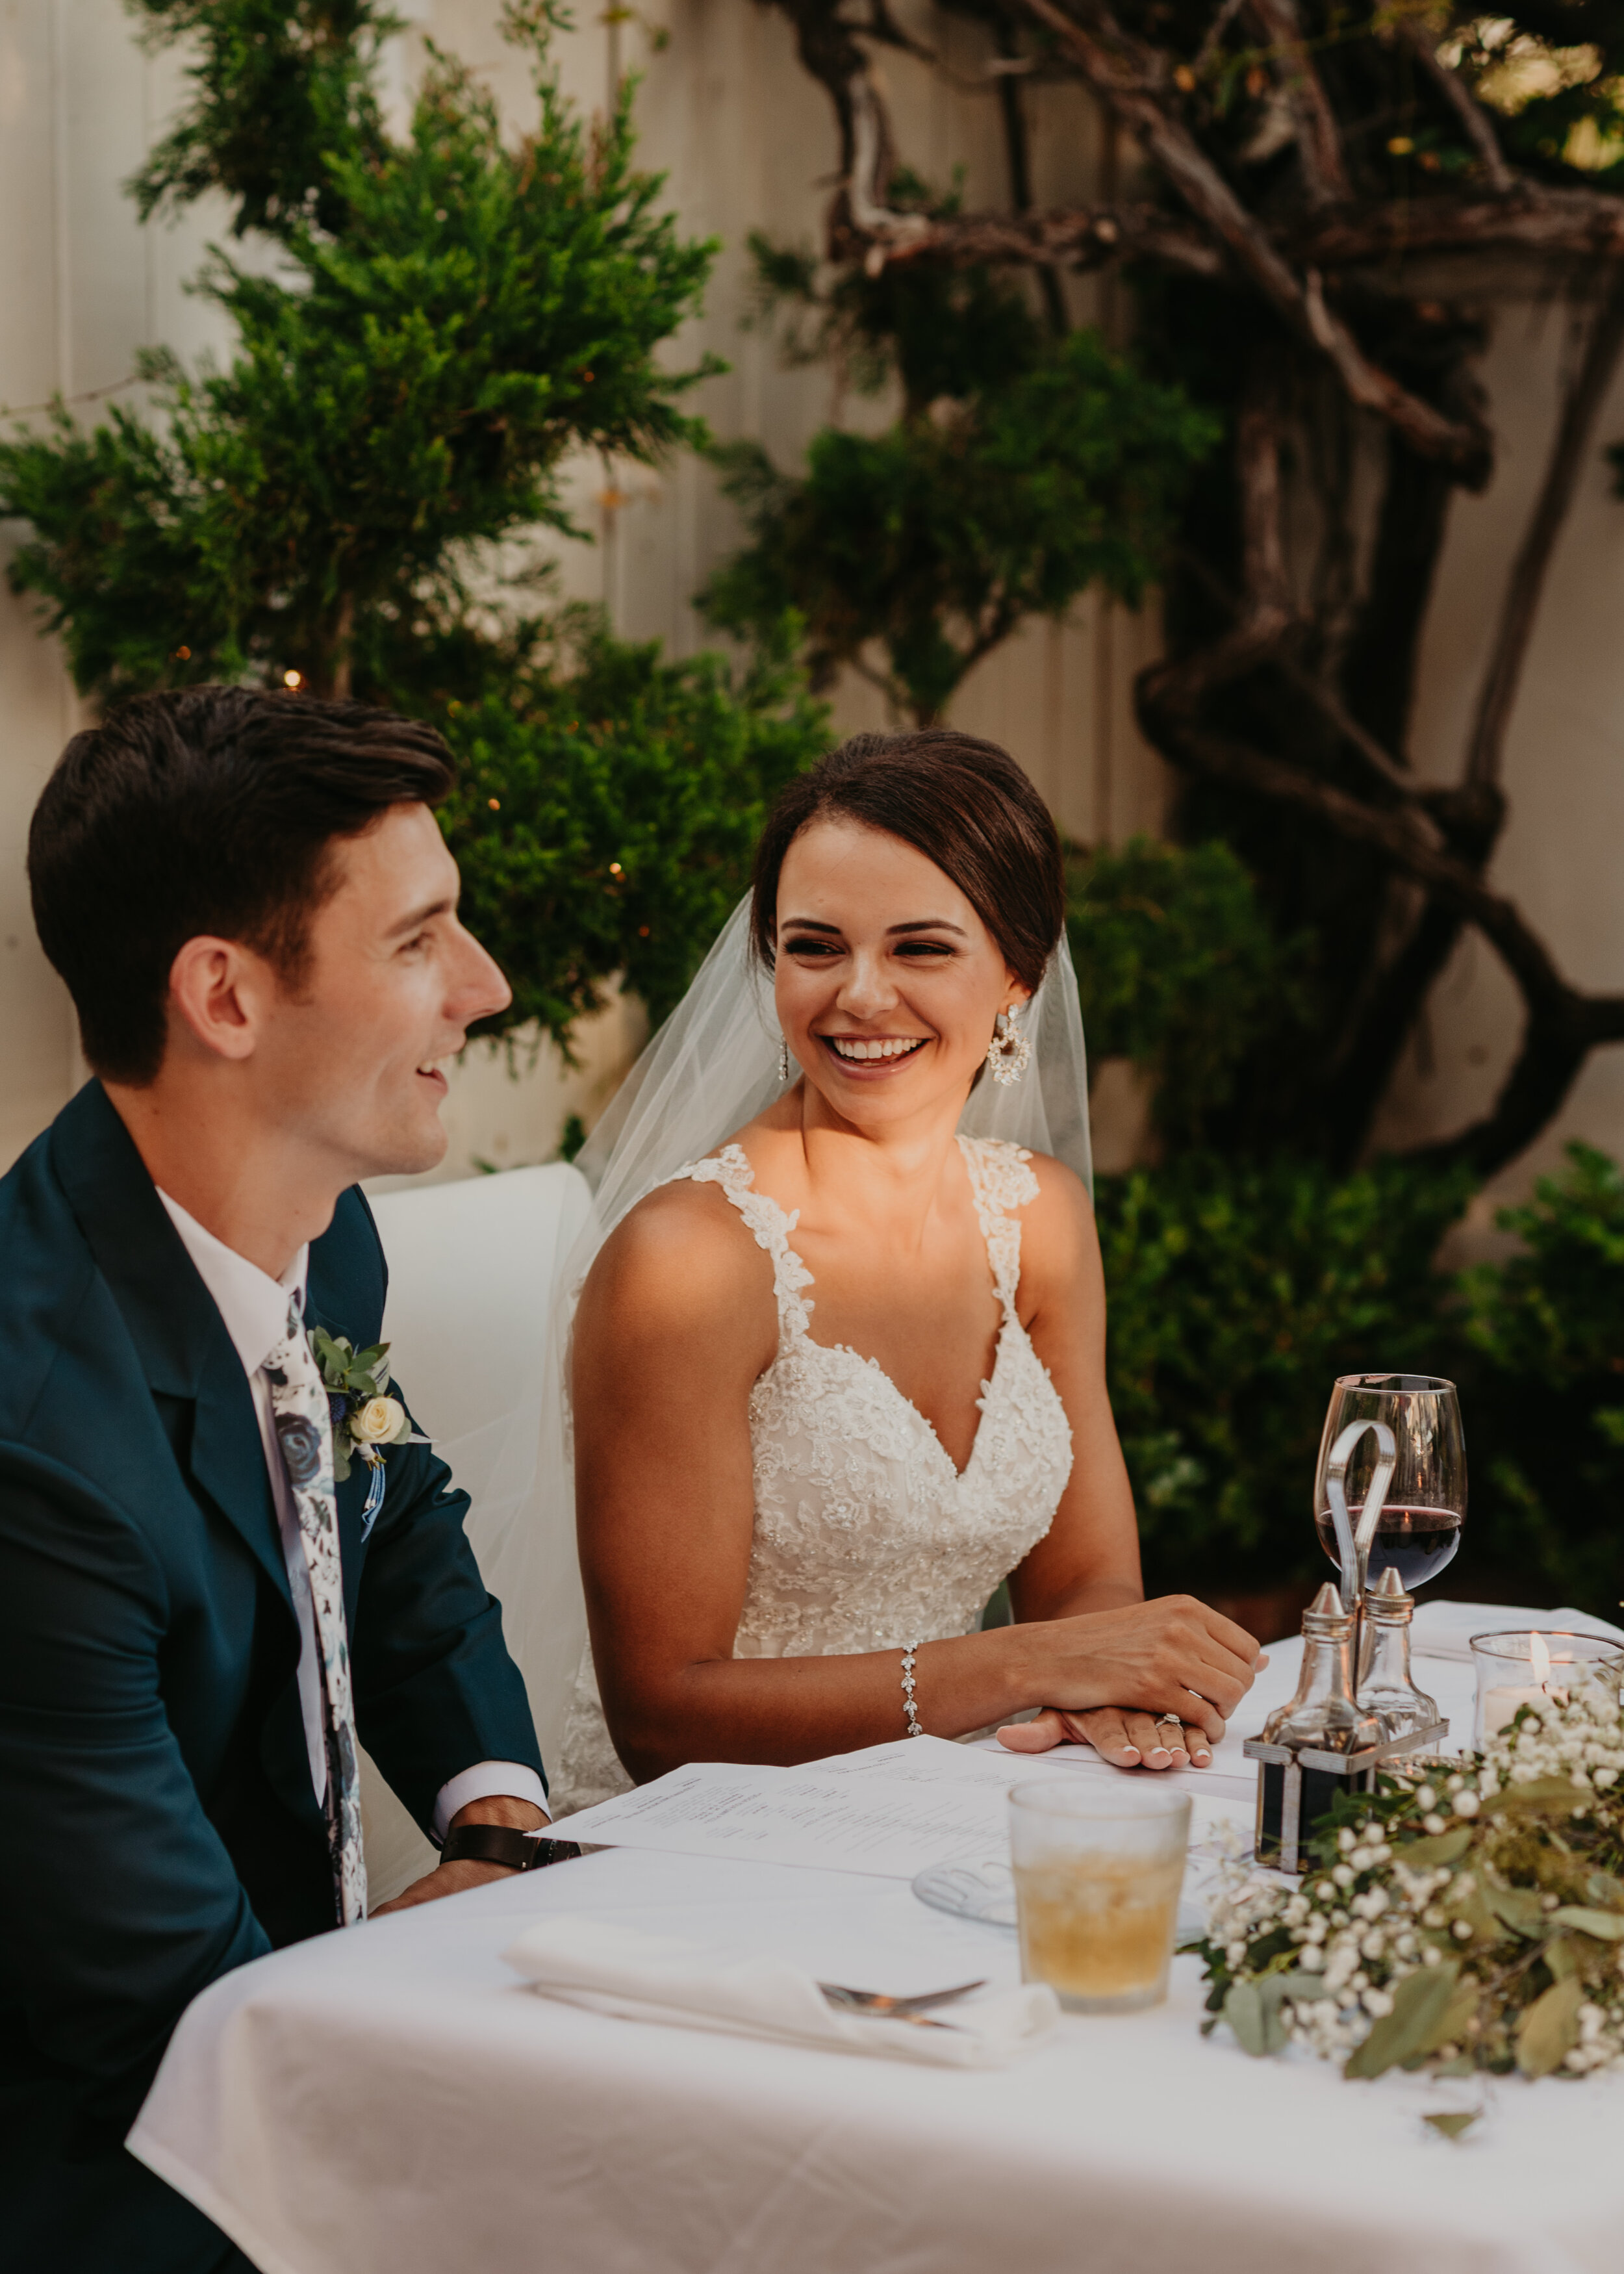 Intimate Wedding in San Diego at the Old Venice Restaurant | San Diego Elopement Photographer | Southern California elopement photographer | small wedding | couple eloping in san diego